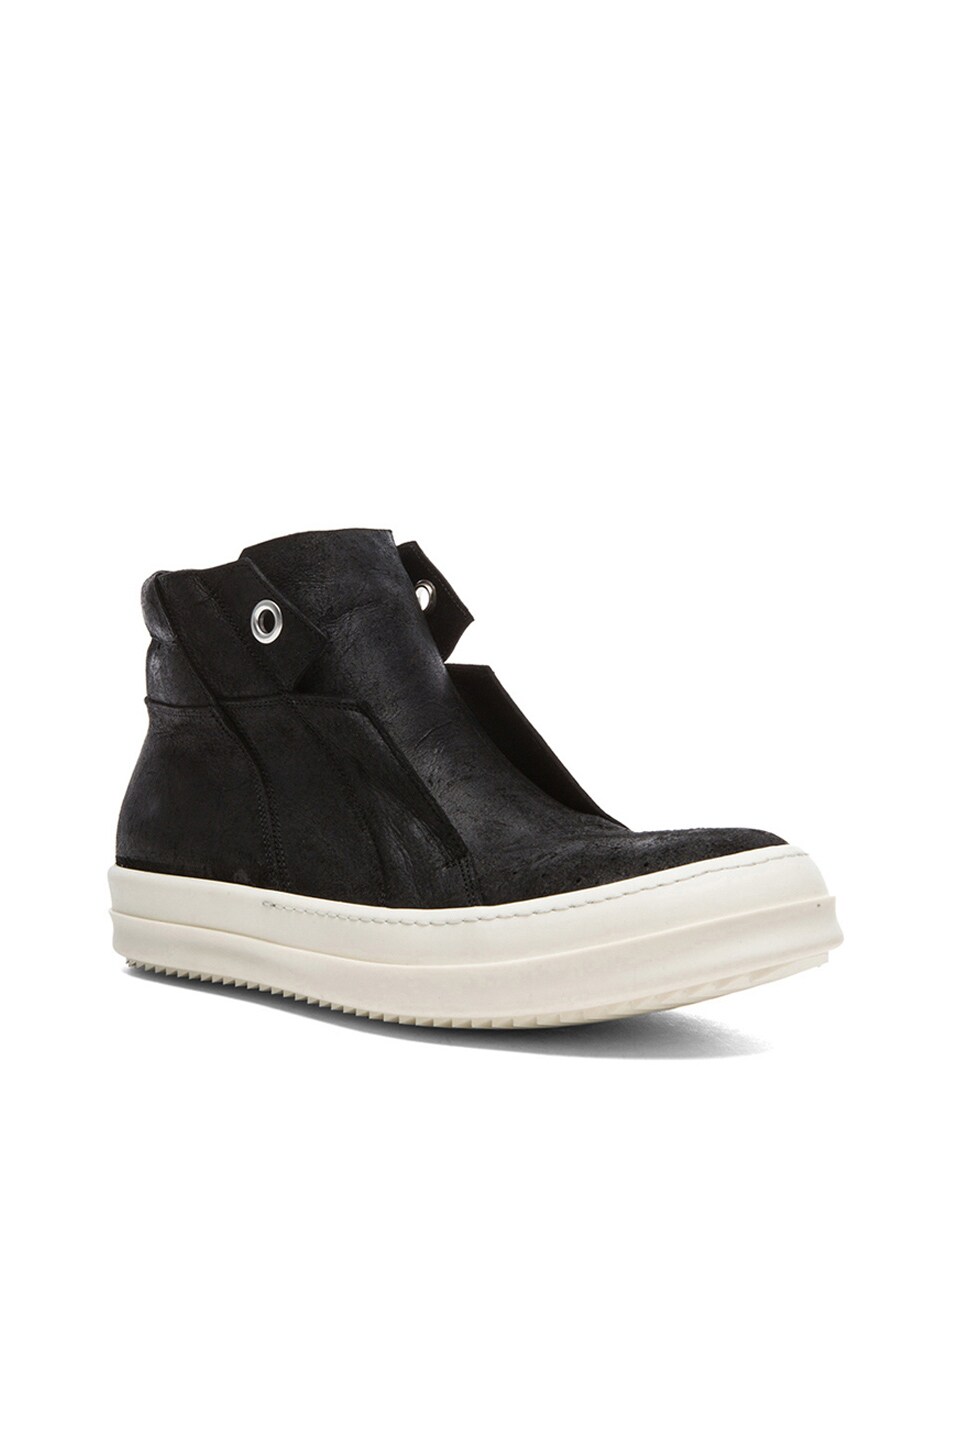 Image 1 of Rick Owens Island Dunk Distressed Leather Sneakers in Black